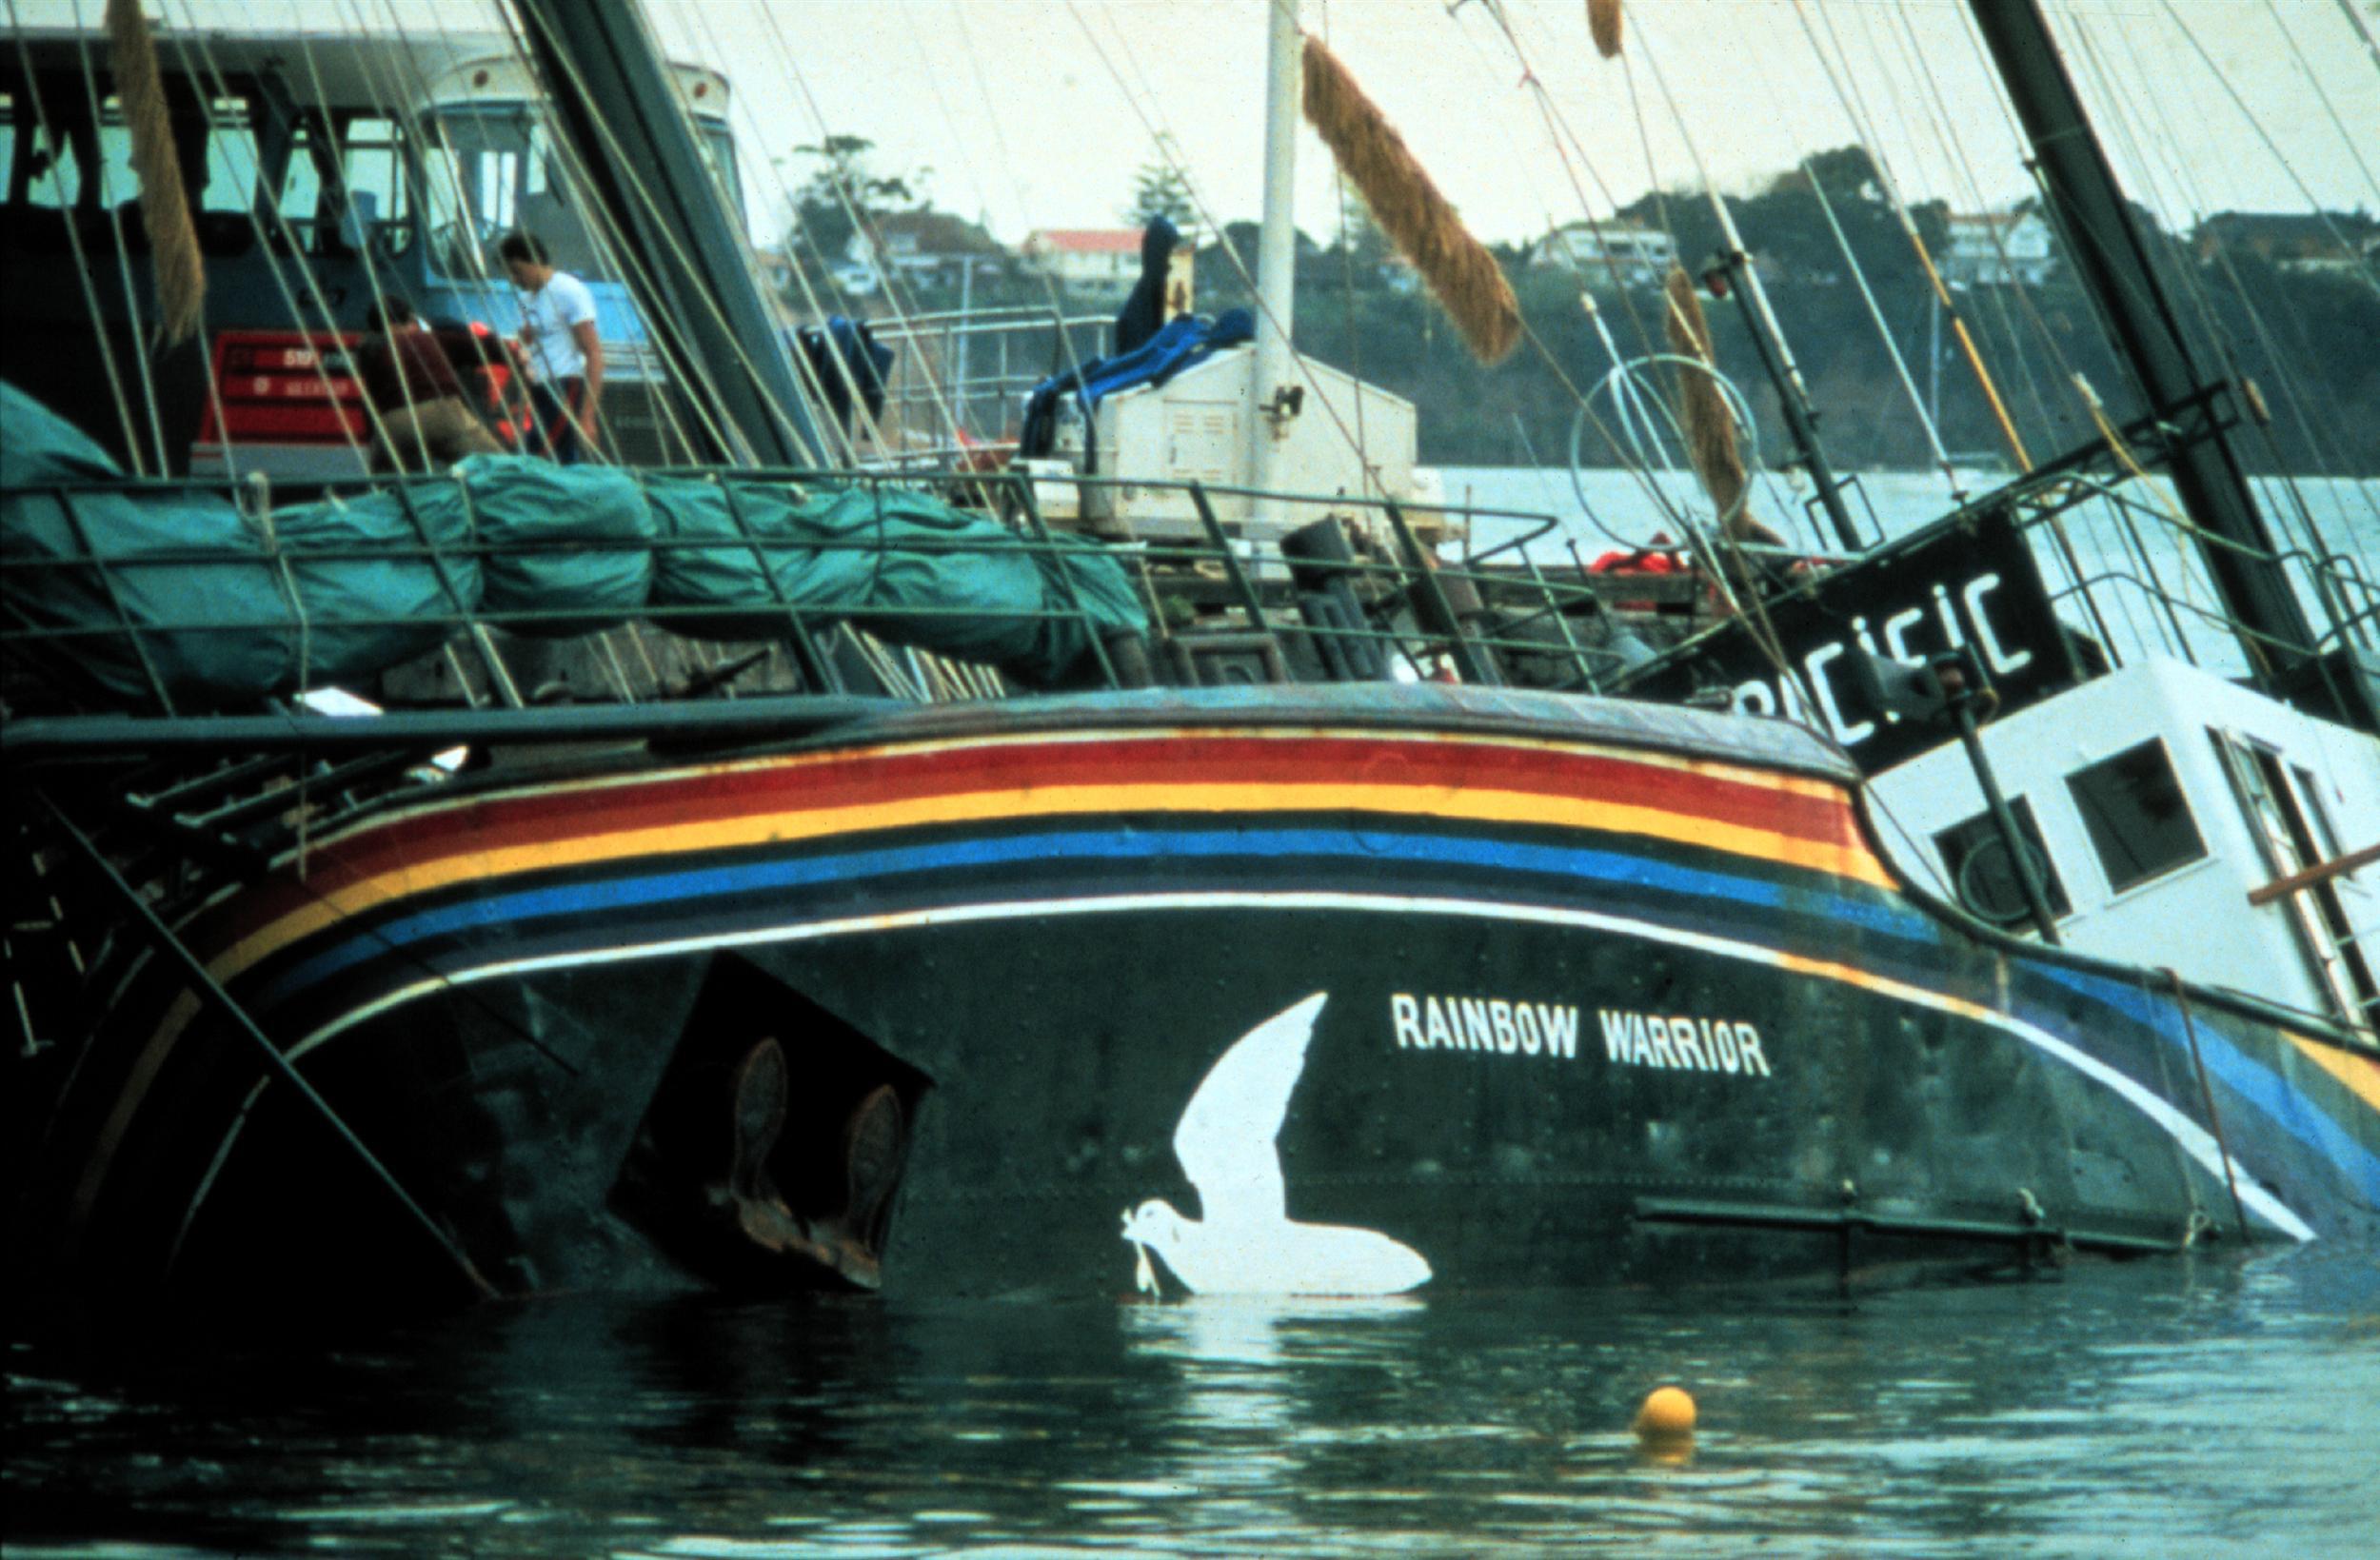 The Rainbow Warrior is in Marsden Wharf in Auckland Harbour after the bombing by French secret service agents.